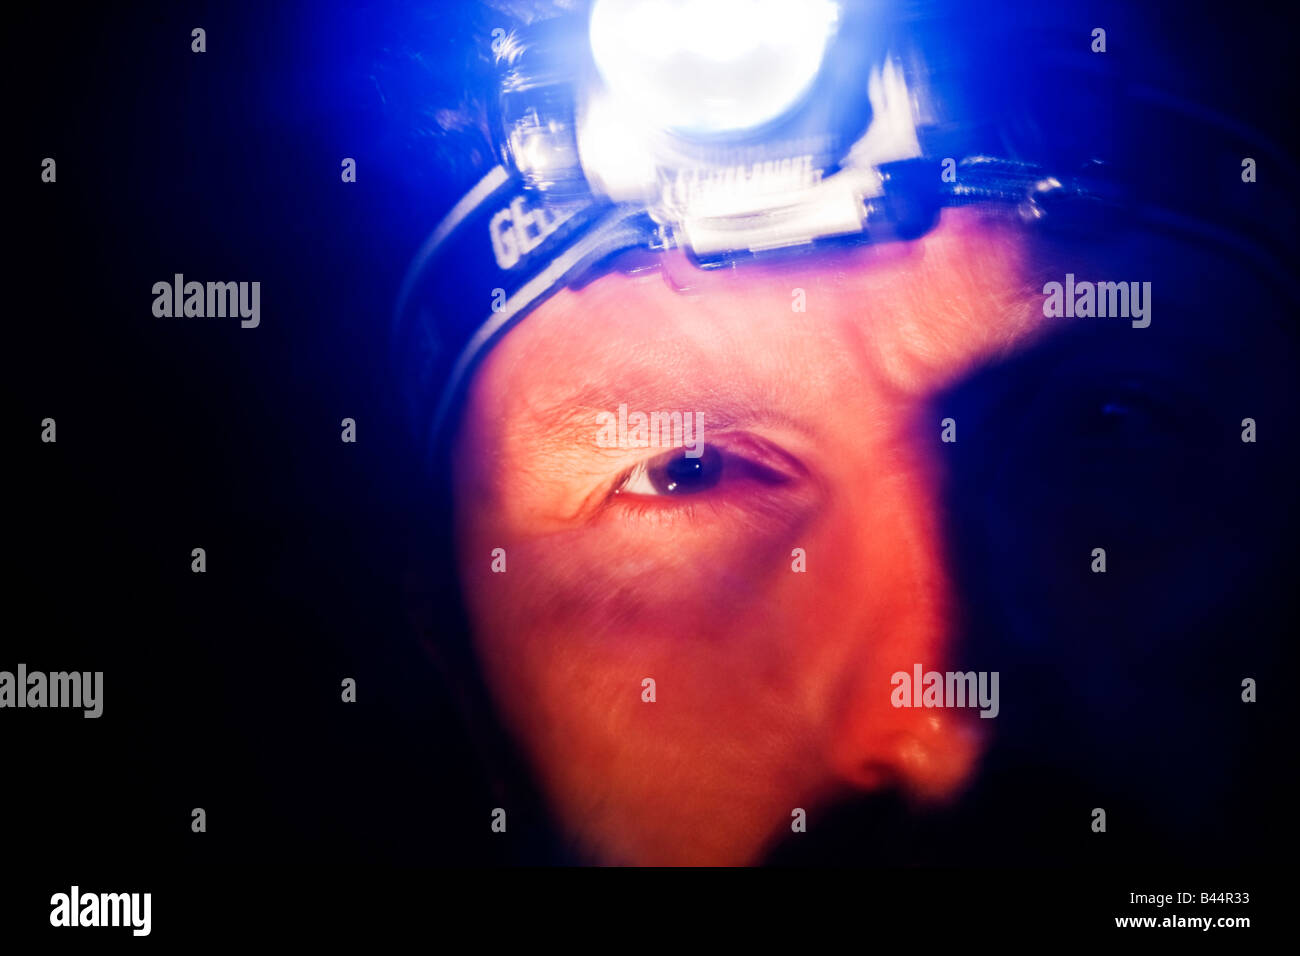 Male head wearing an LED headtorch in a darkened survival situation Stock Photo